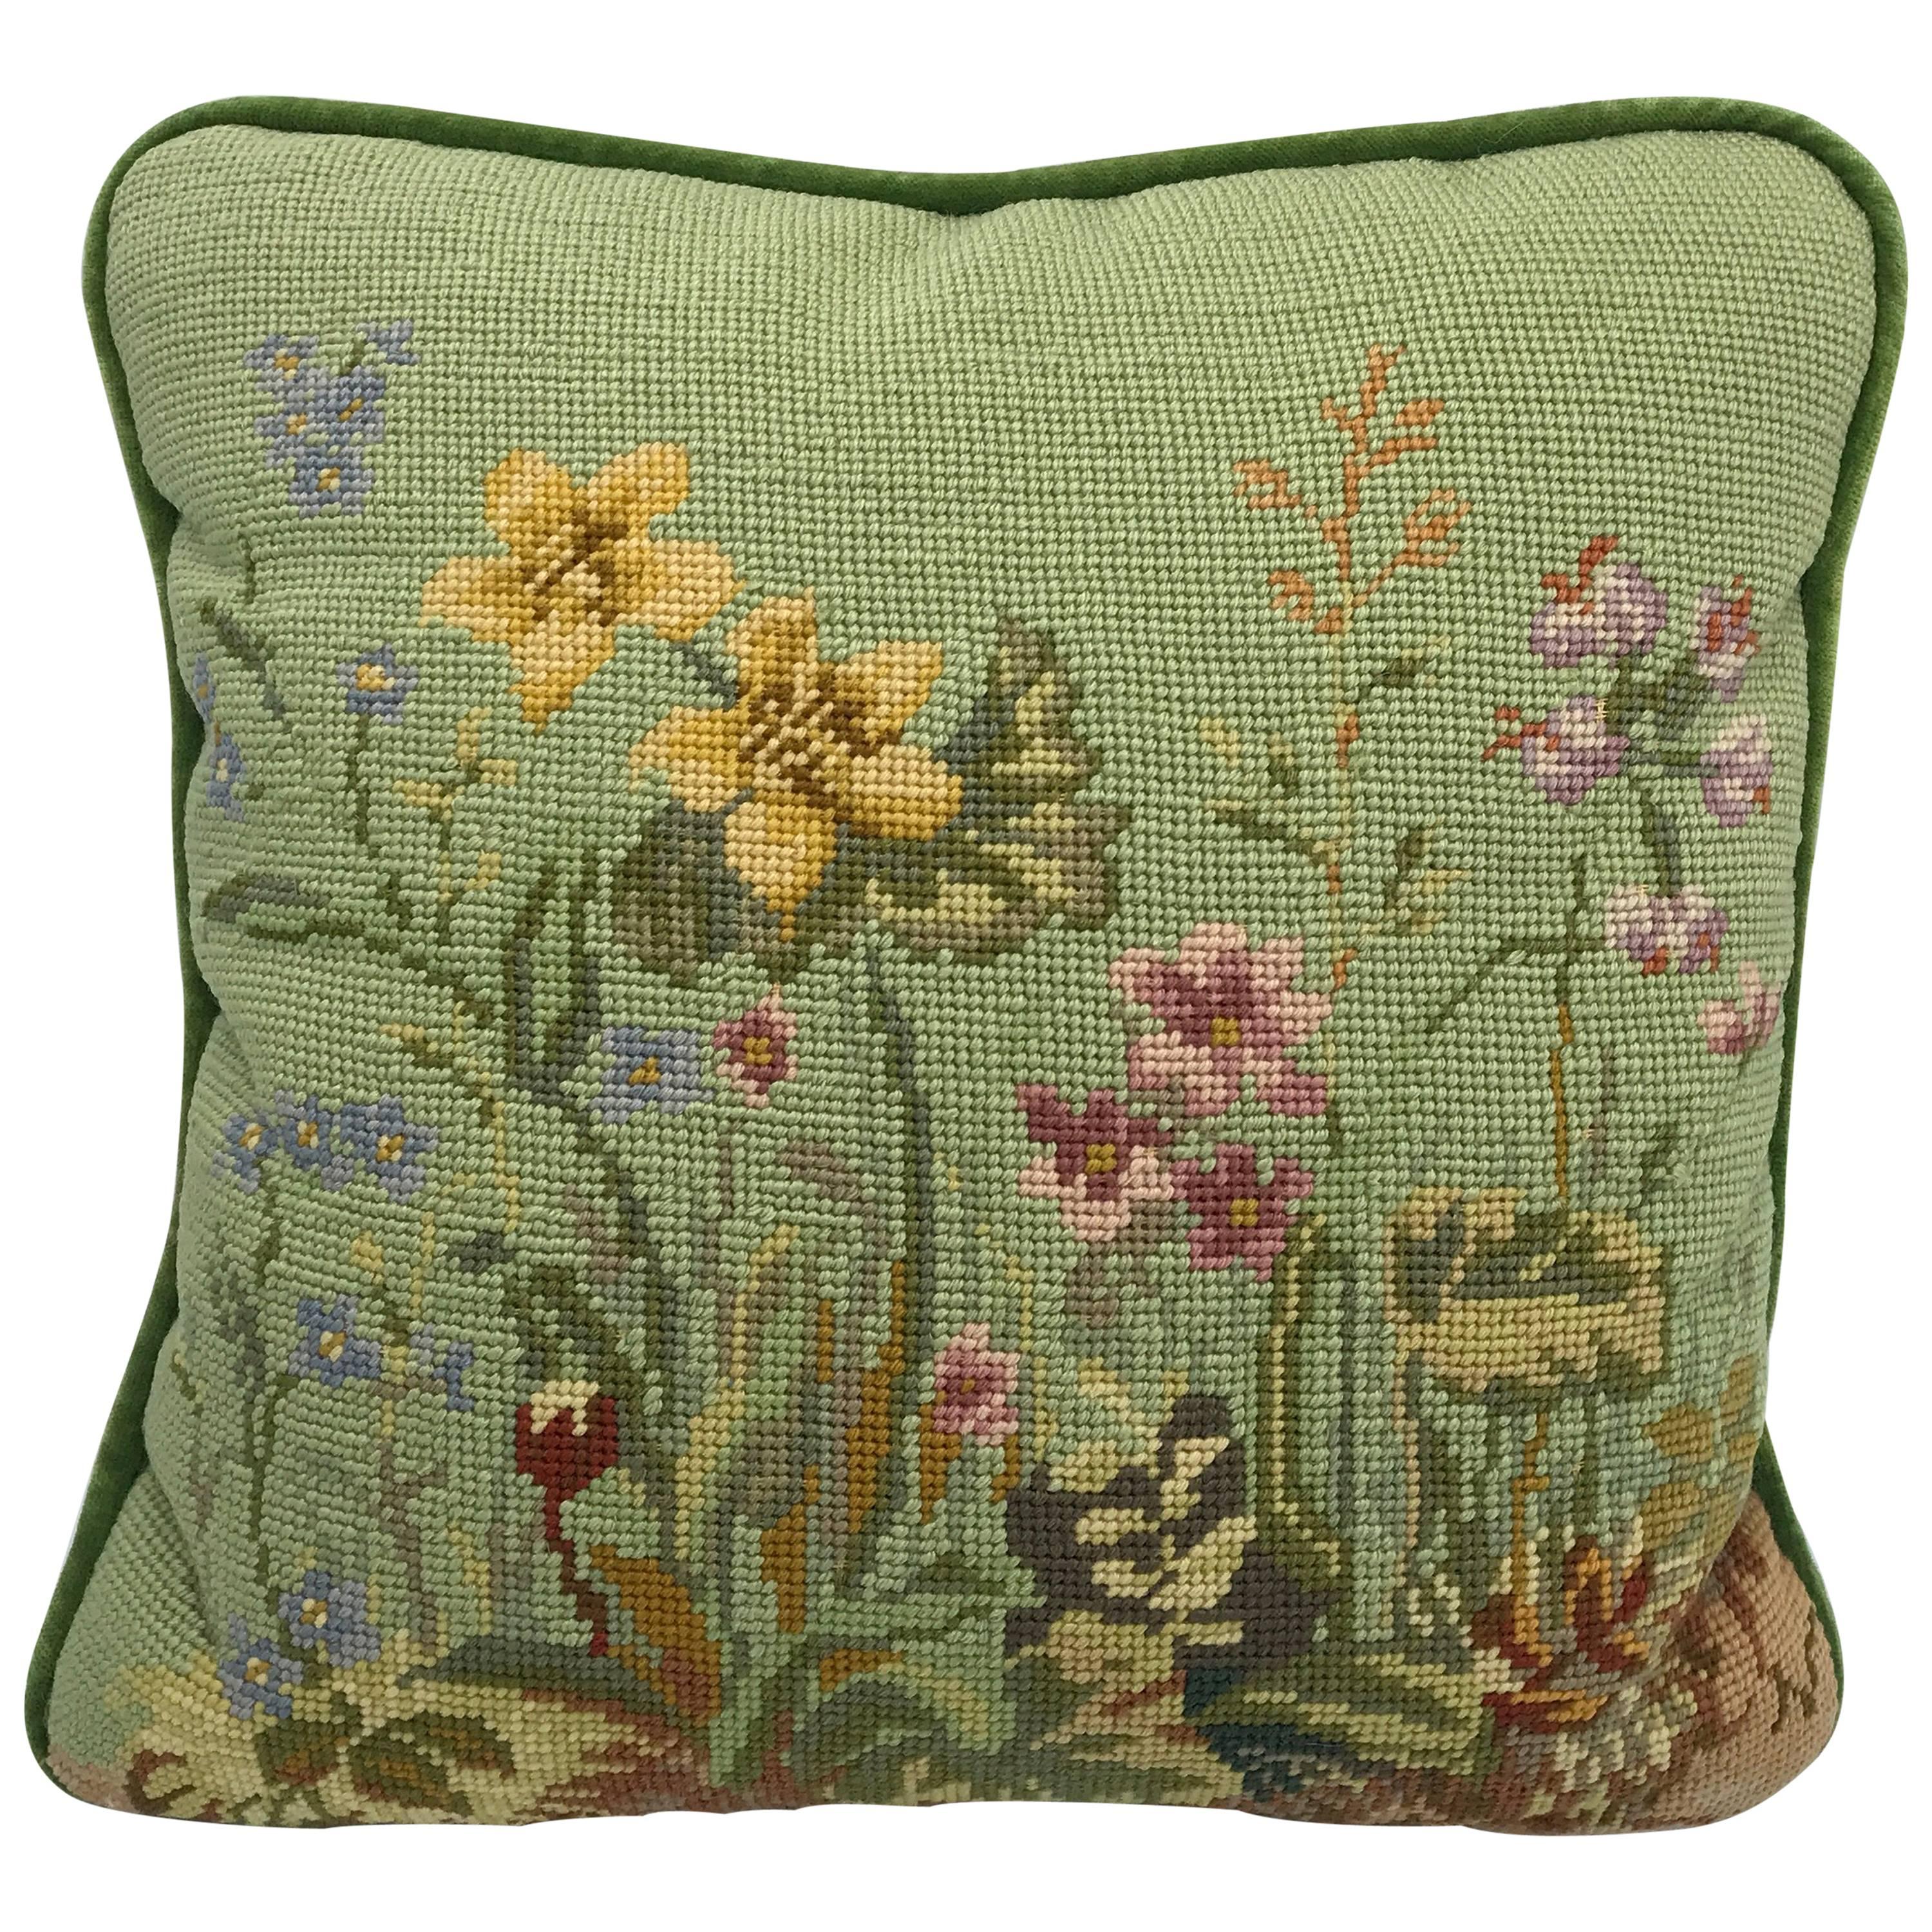 1950s Green Needlepoint Pillow with Floral Motif